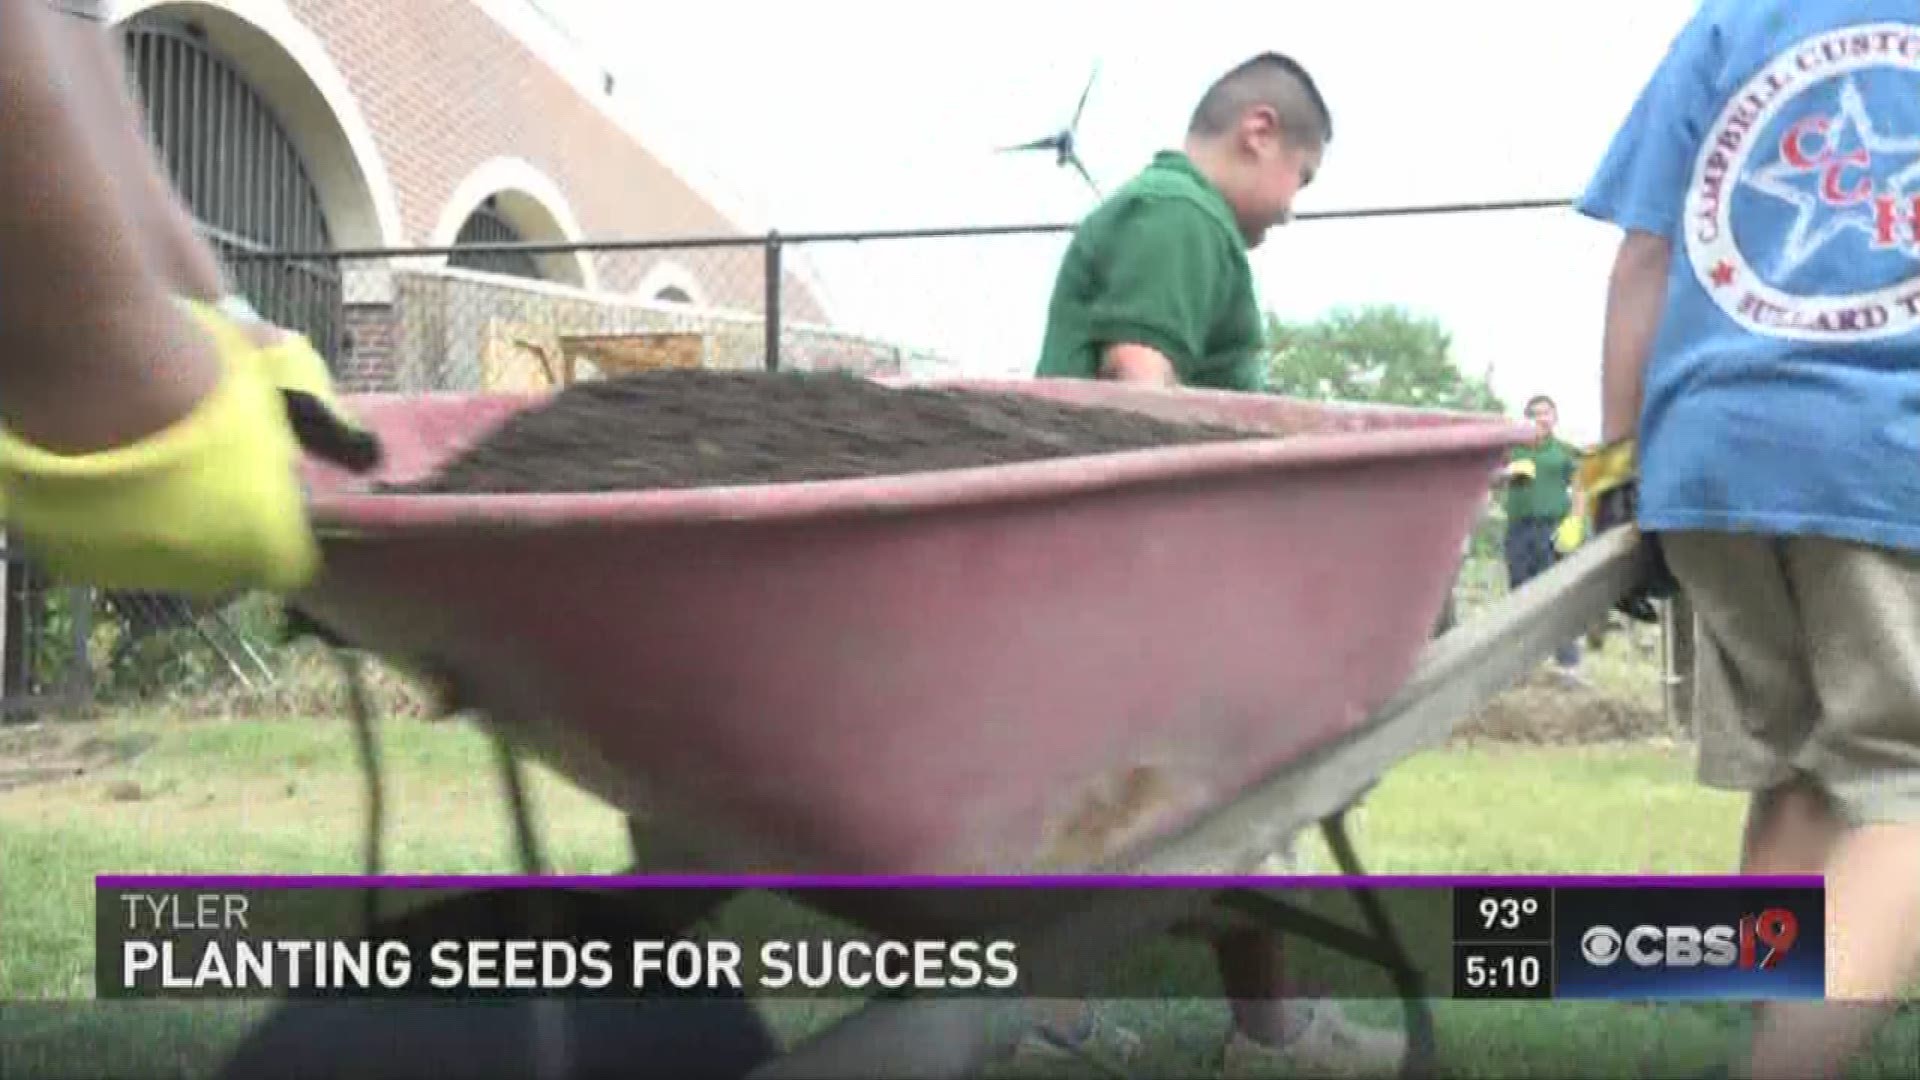 For many people, working in the yard may seem like a chore, but students at Douglas Elementary School in Tyler are excited about gardening.